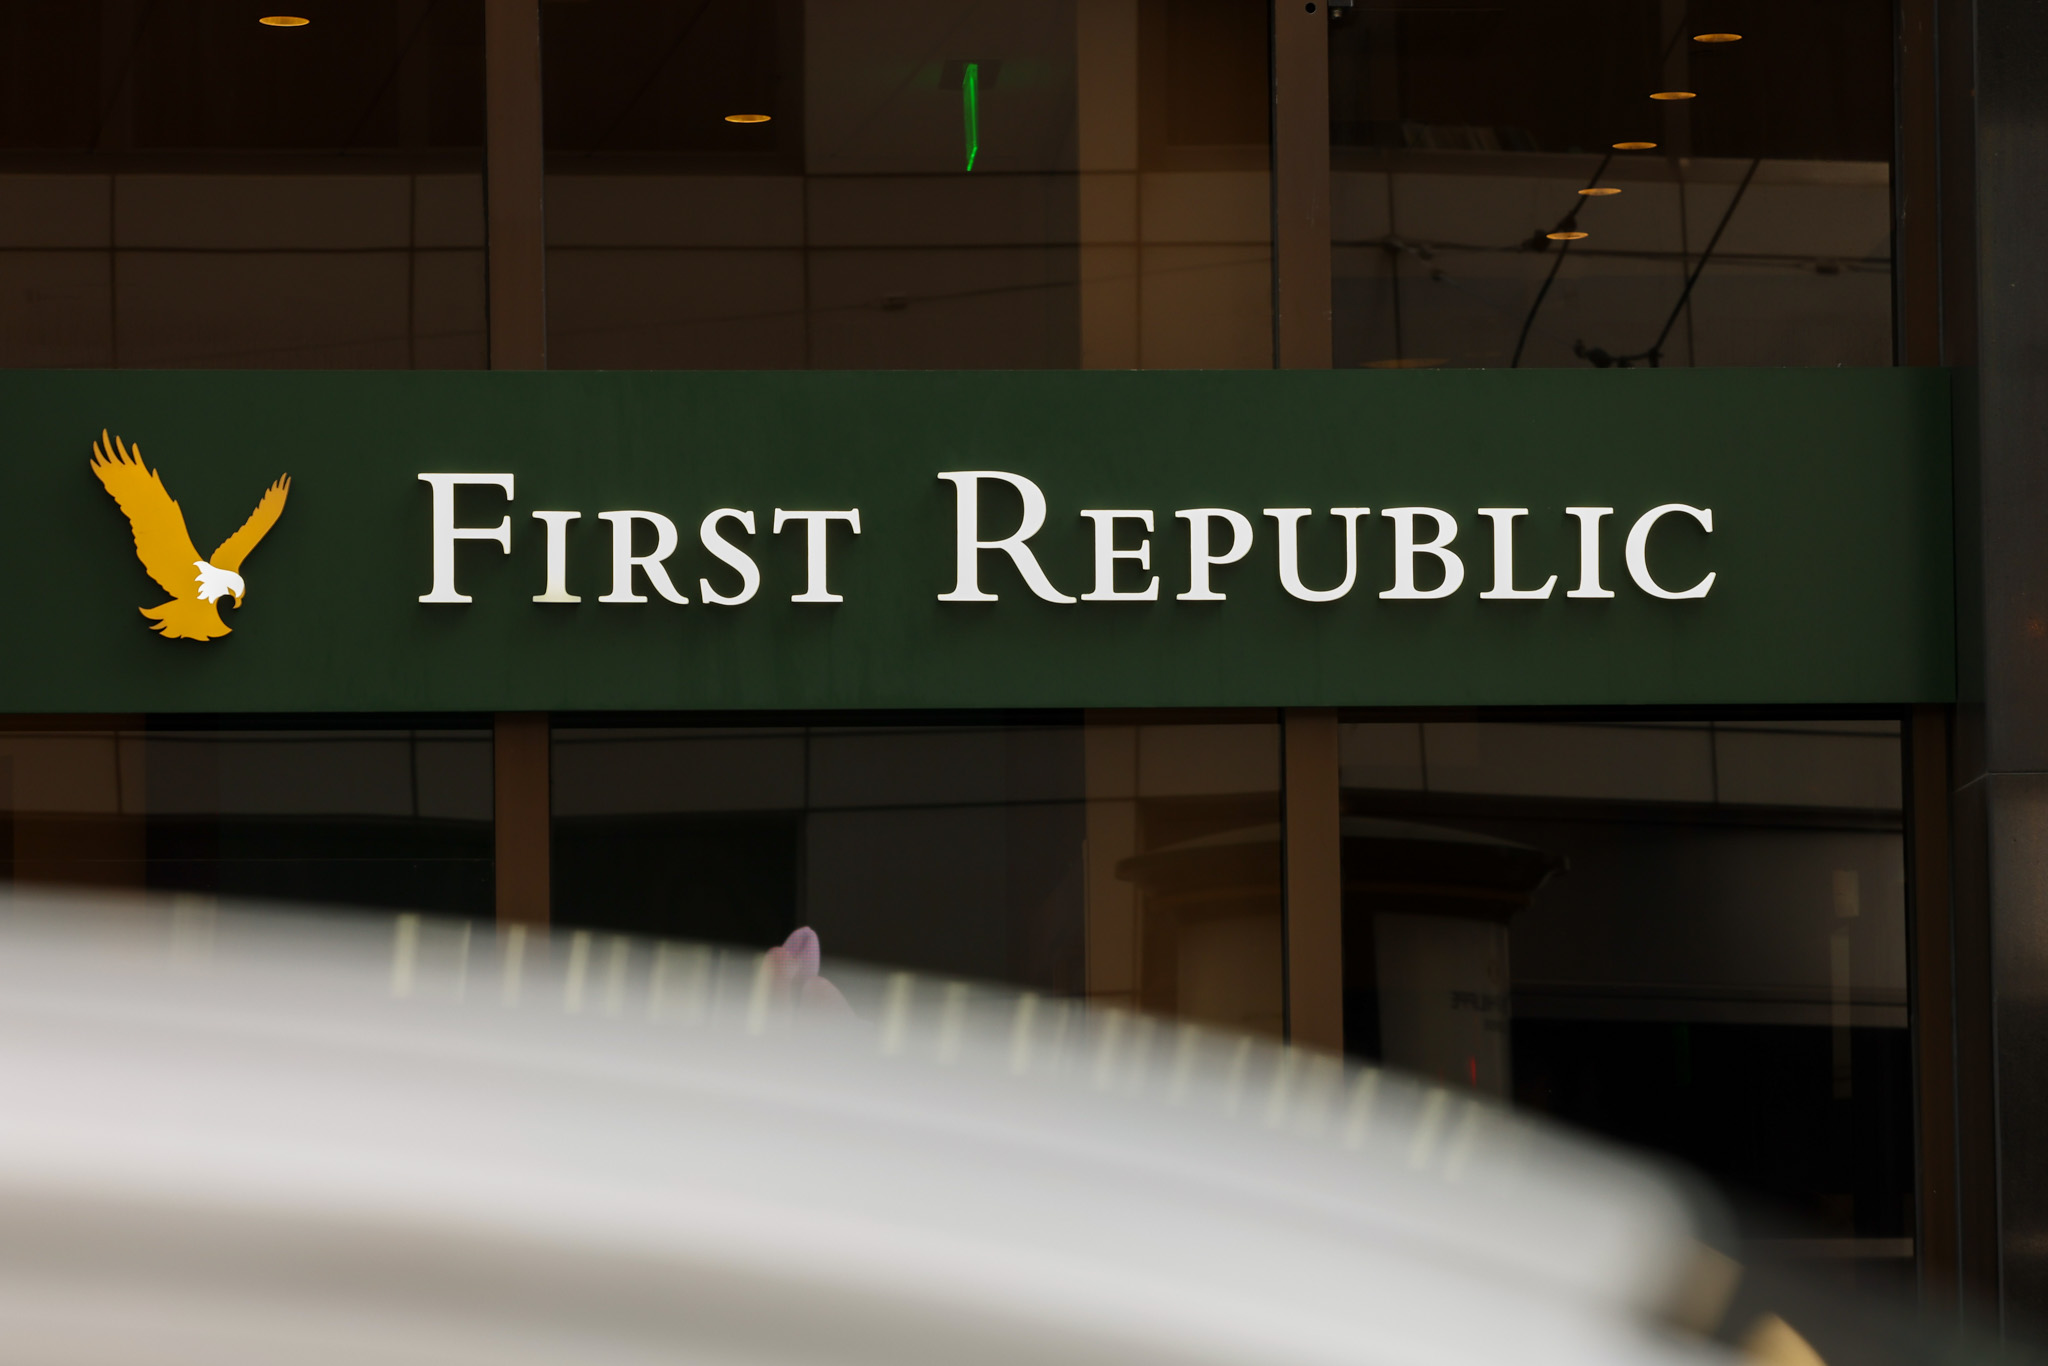 First Republic Is Hanging On for Dear Life. Where Does the Bank Go From Here?